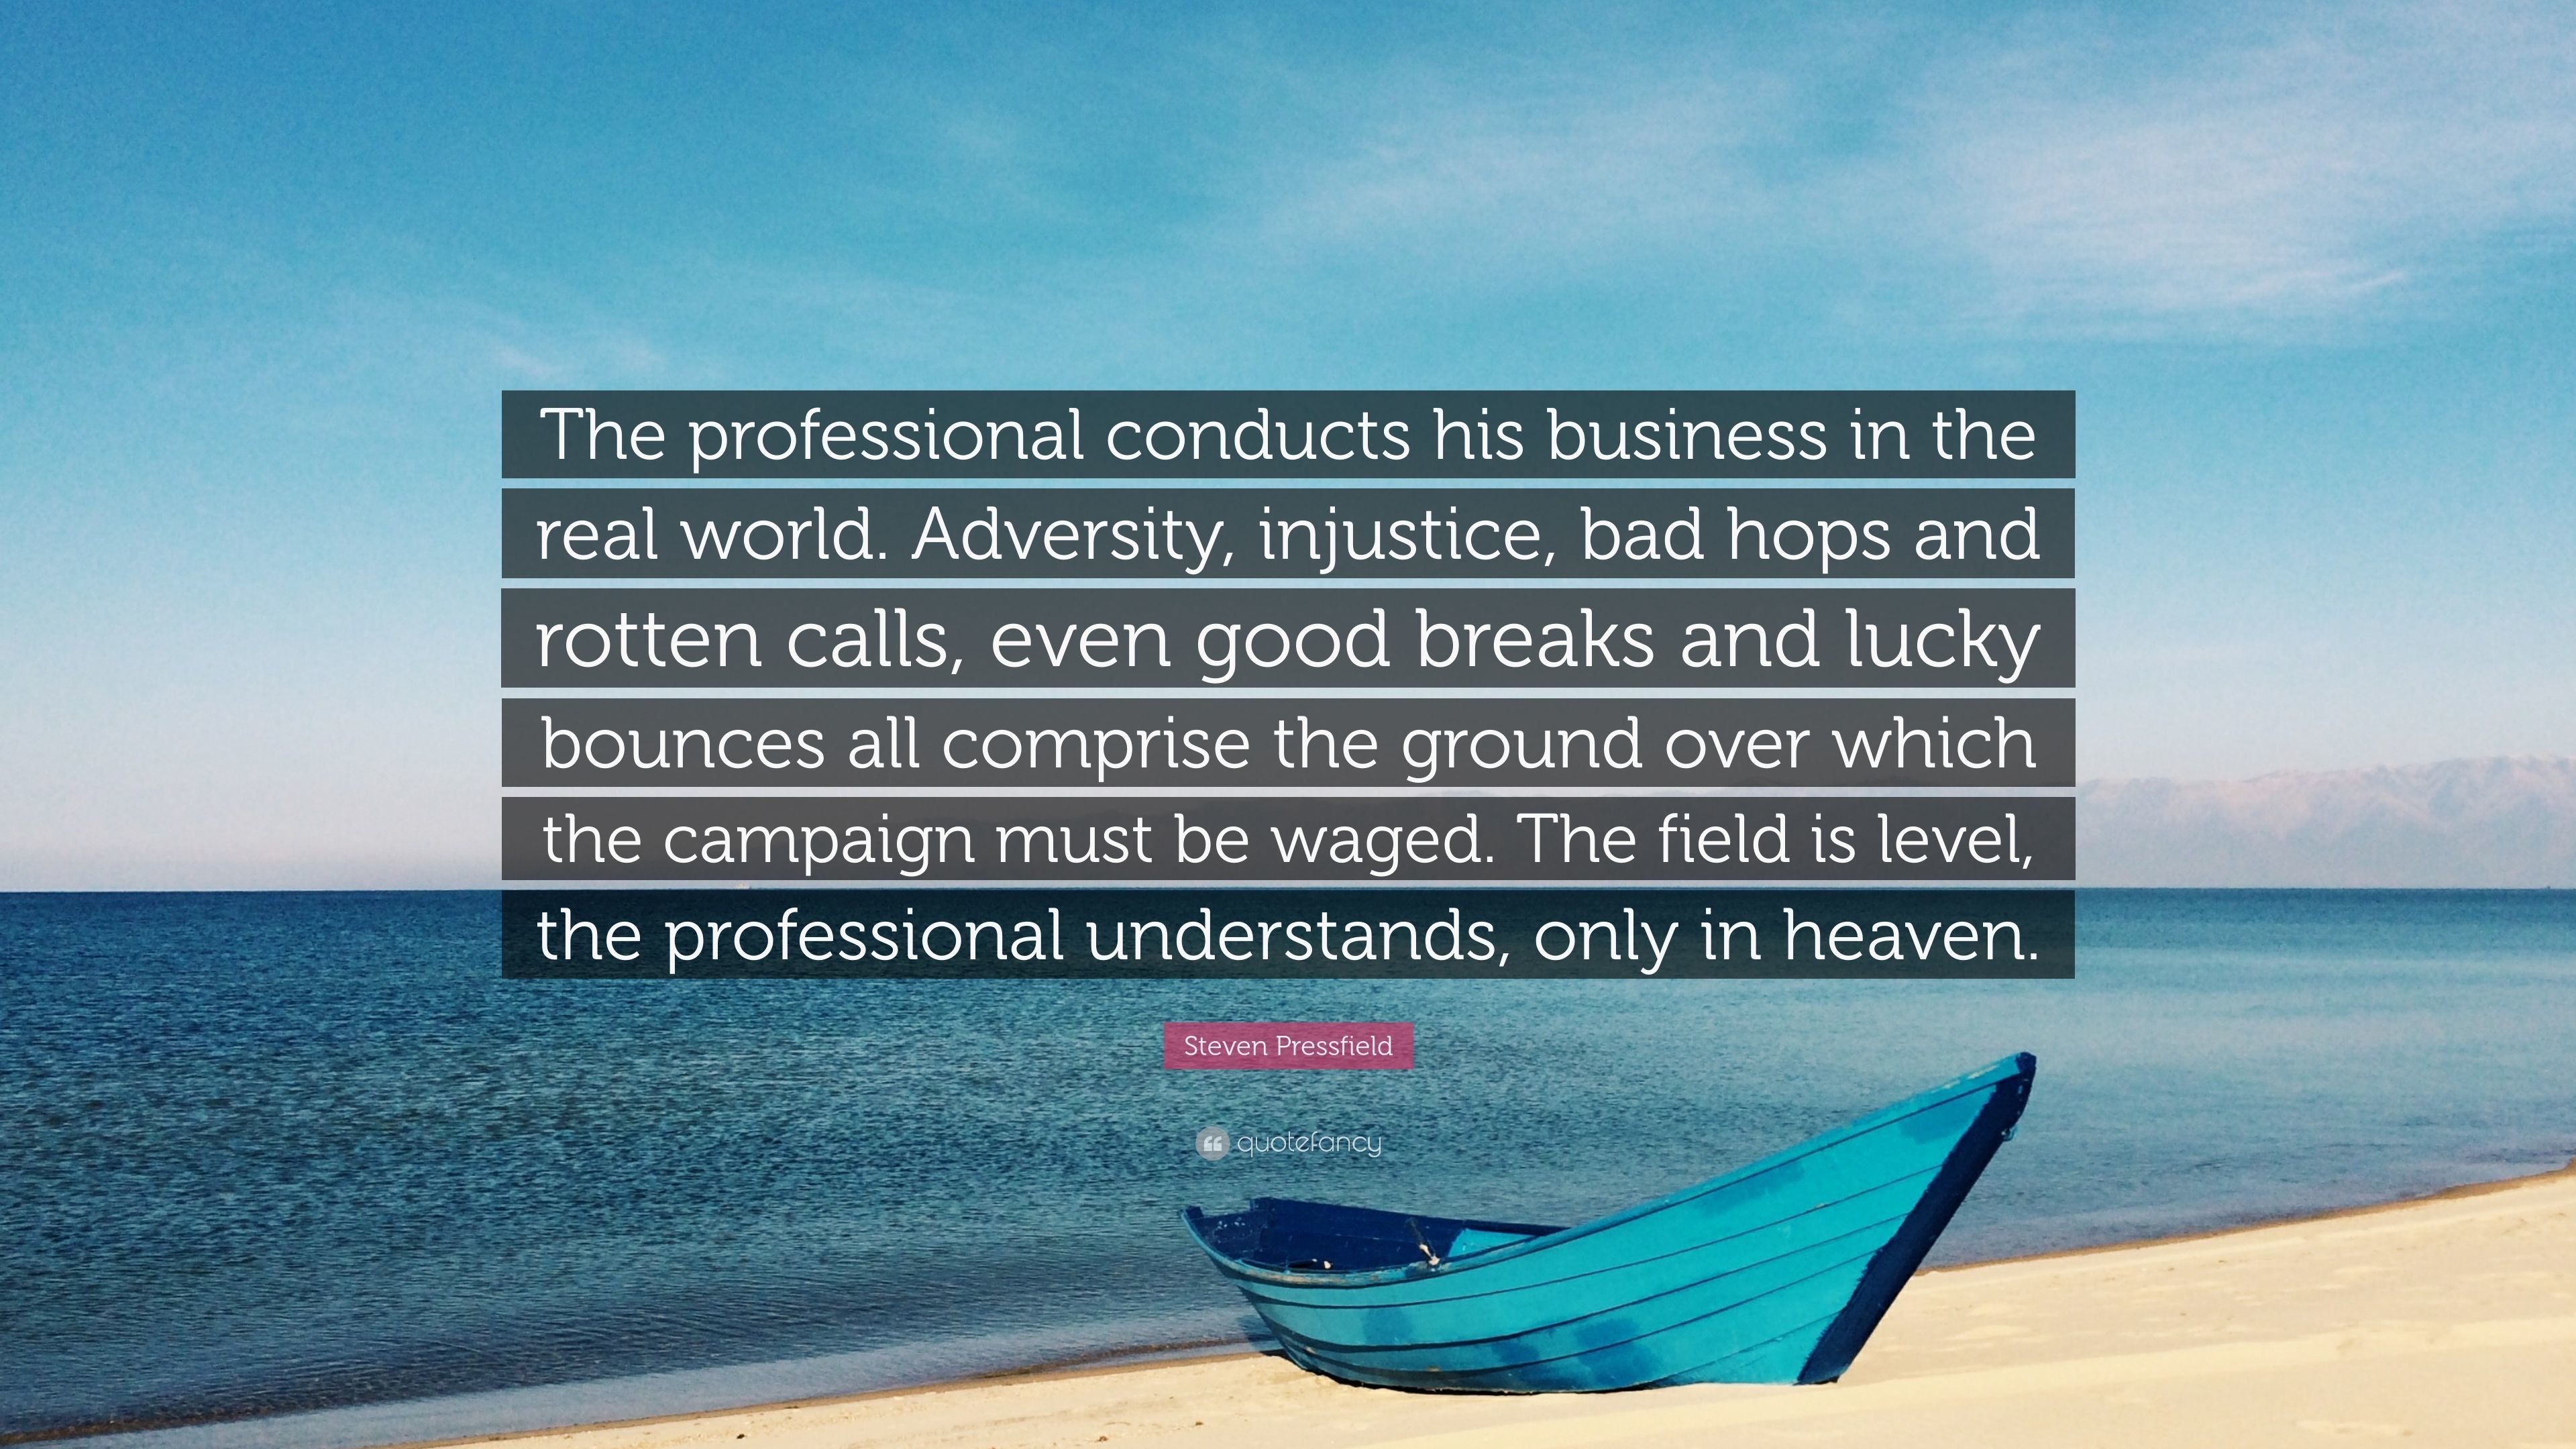 Steven Pressfield Quote The professional conducts his business in the real world. Adversity